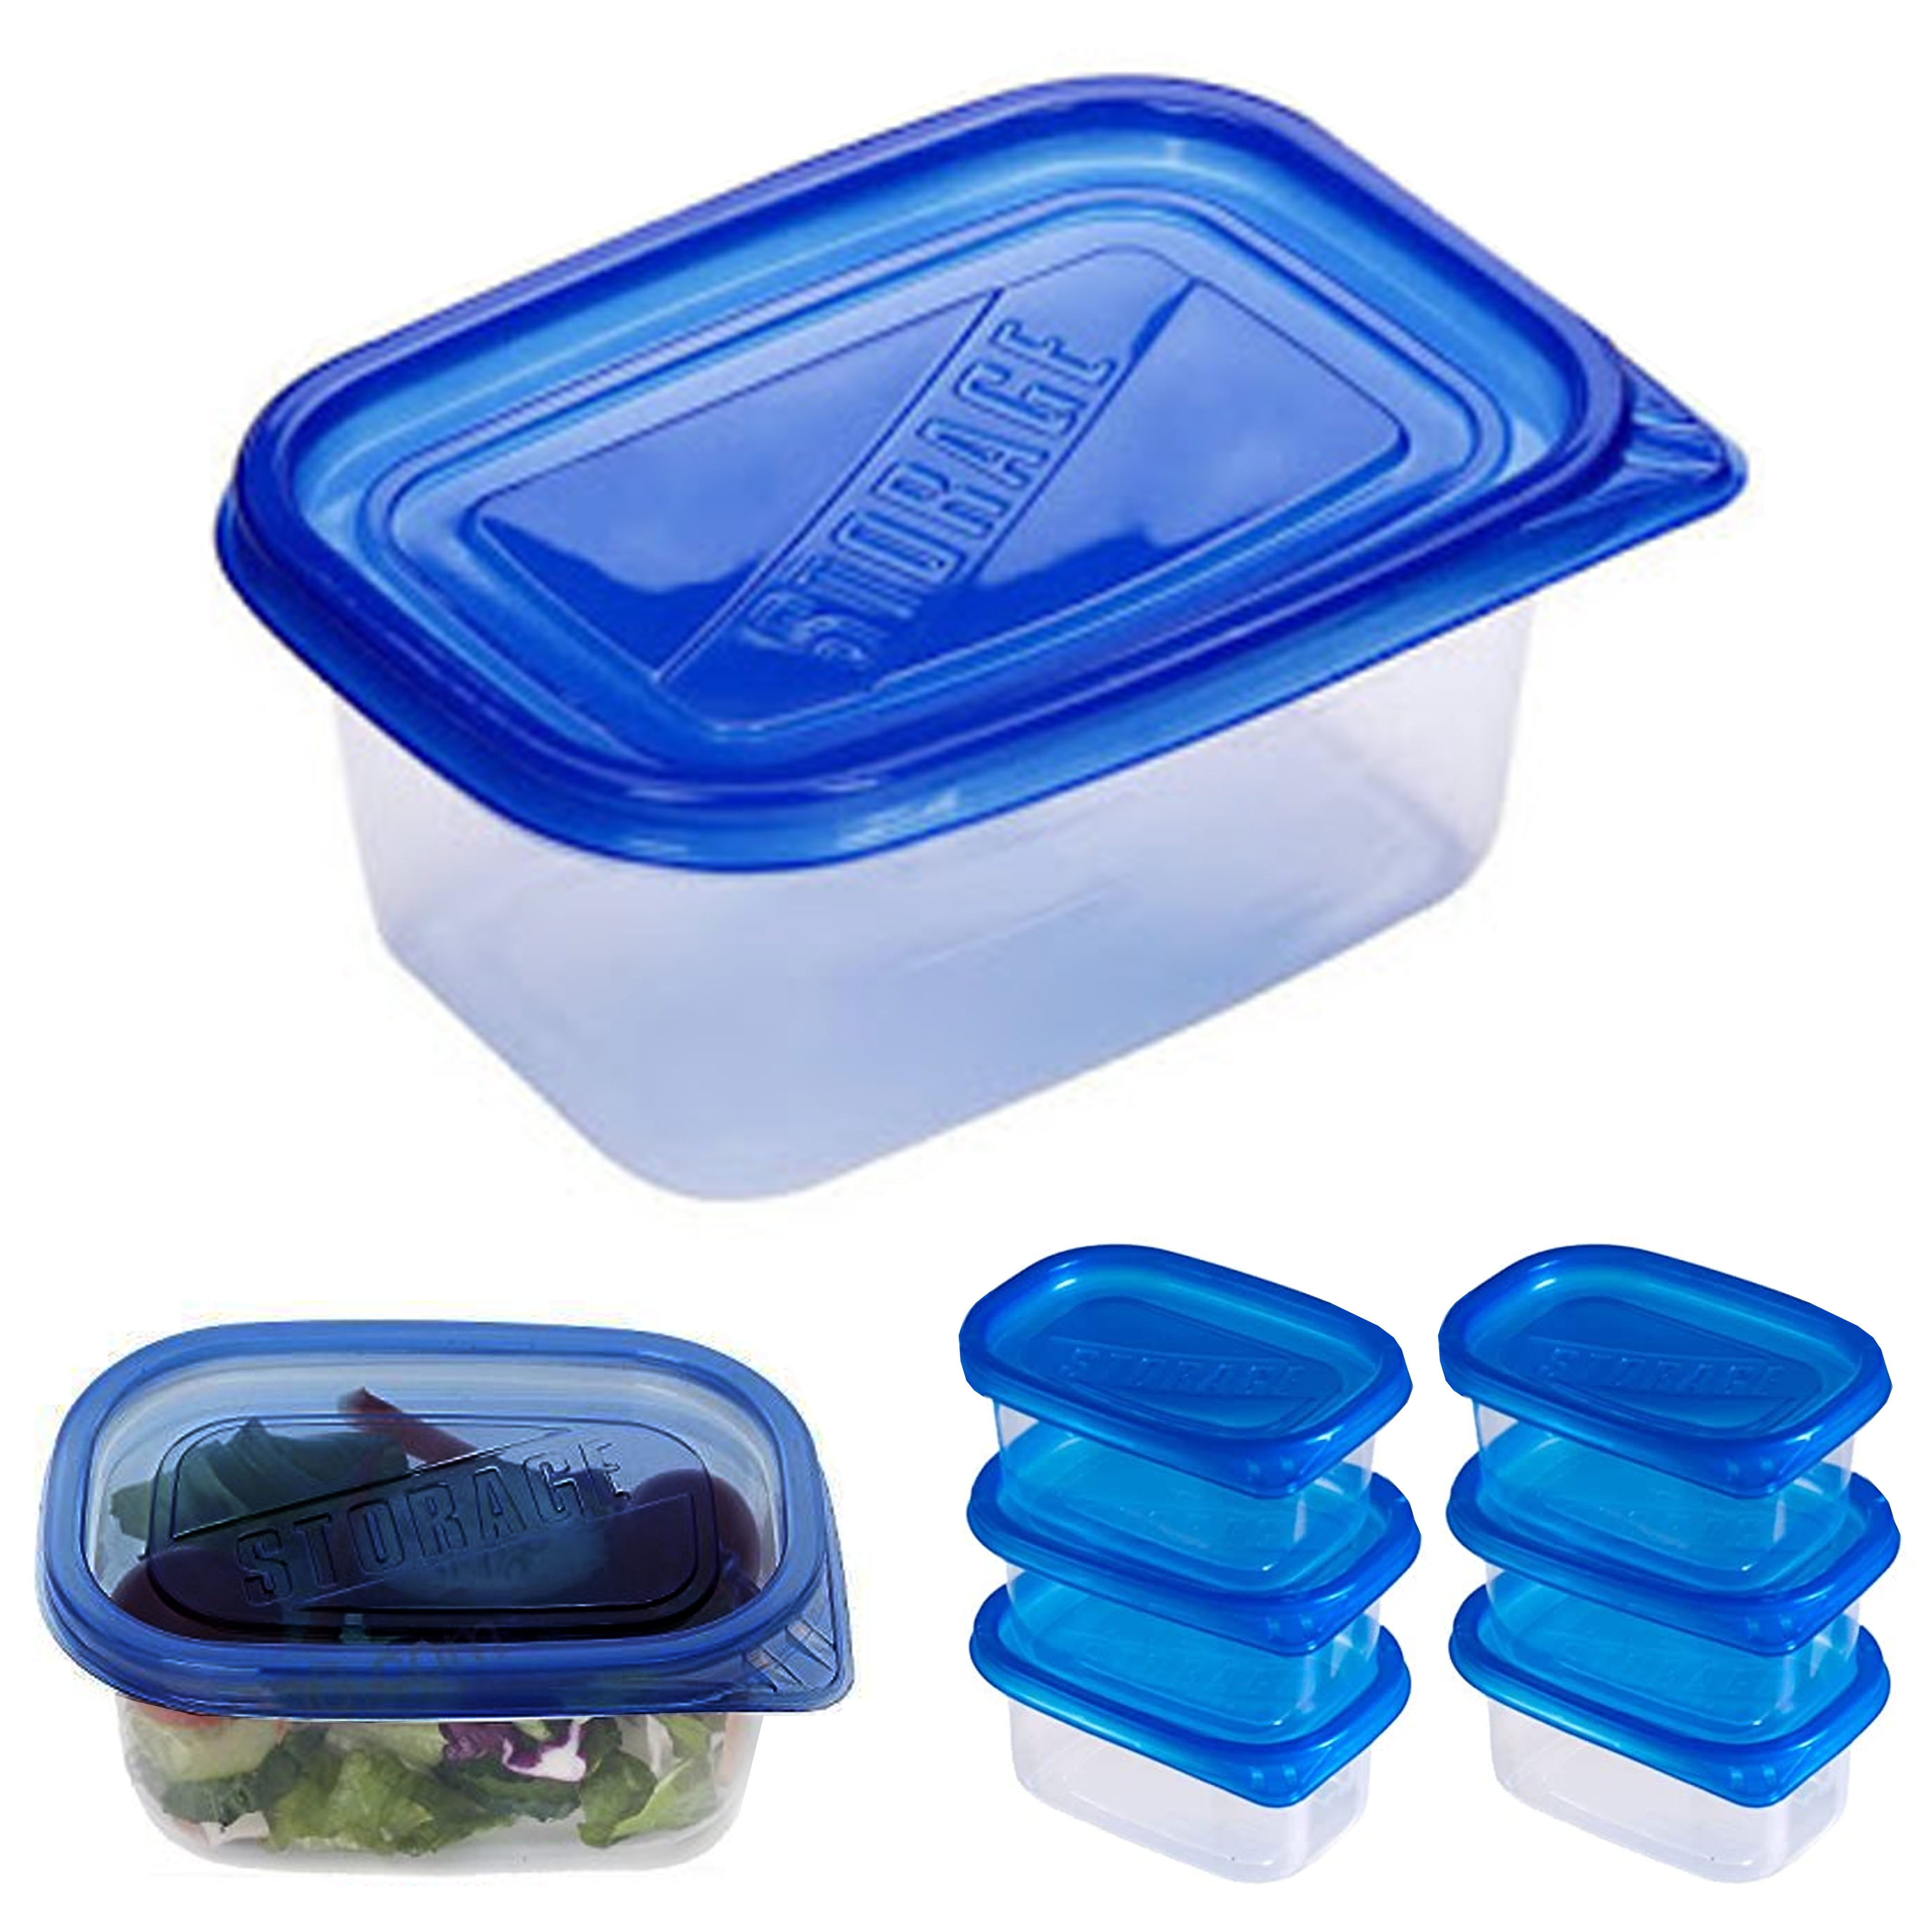 JJOO 10pcs Food Storage Containers with Lids, Reusable Meal Prep Containers, Airtight Plastic Freezer Containers for Pantry, Microwave and